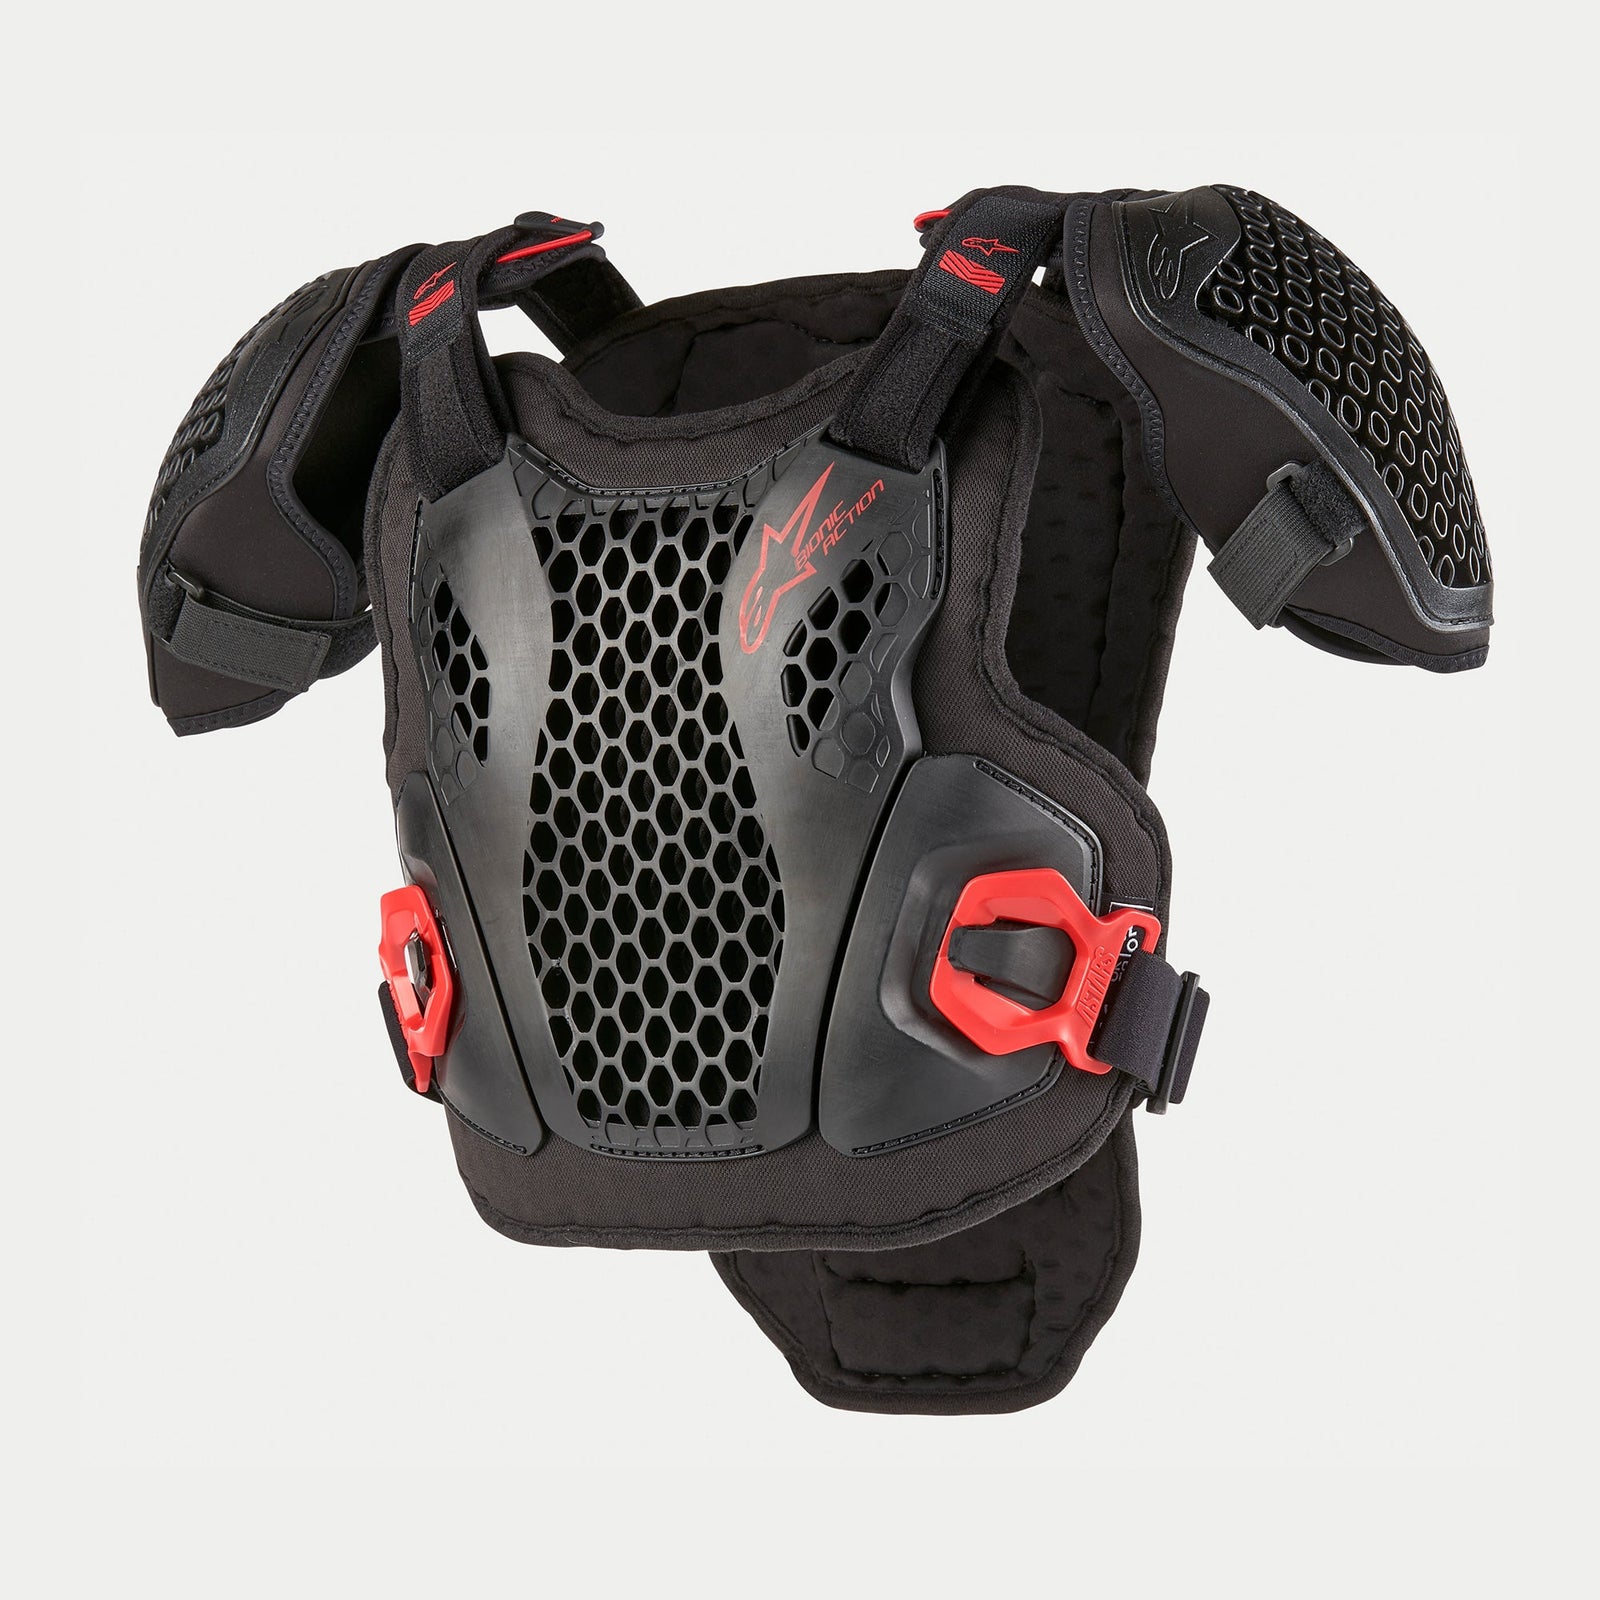 Bionic Action Chest Protector - Adolescente